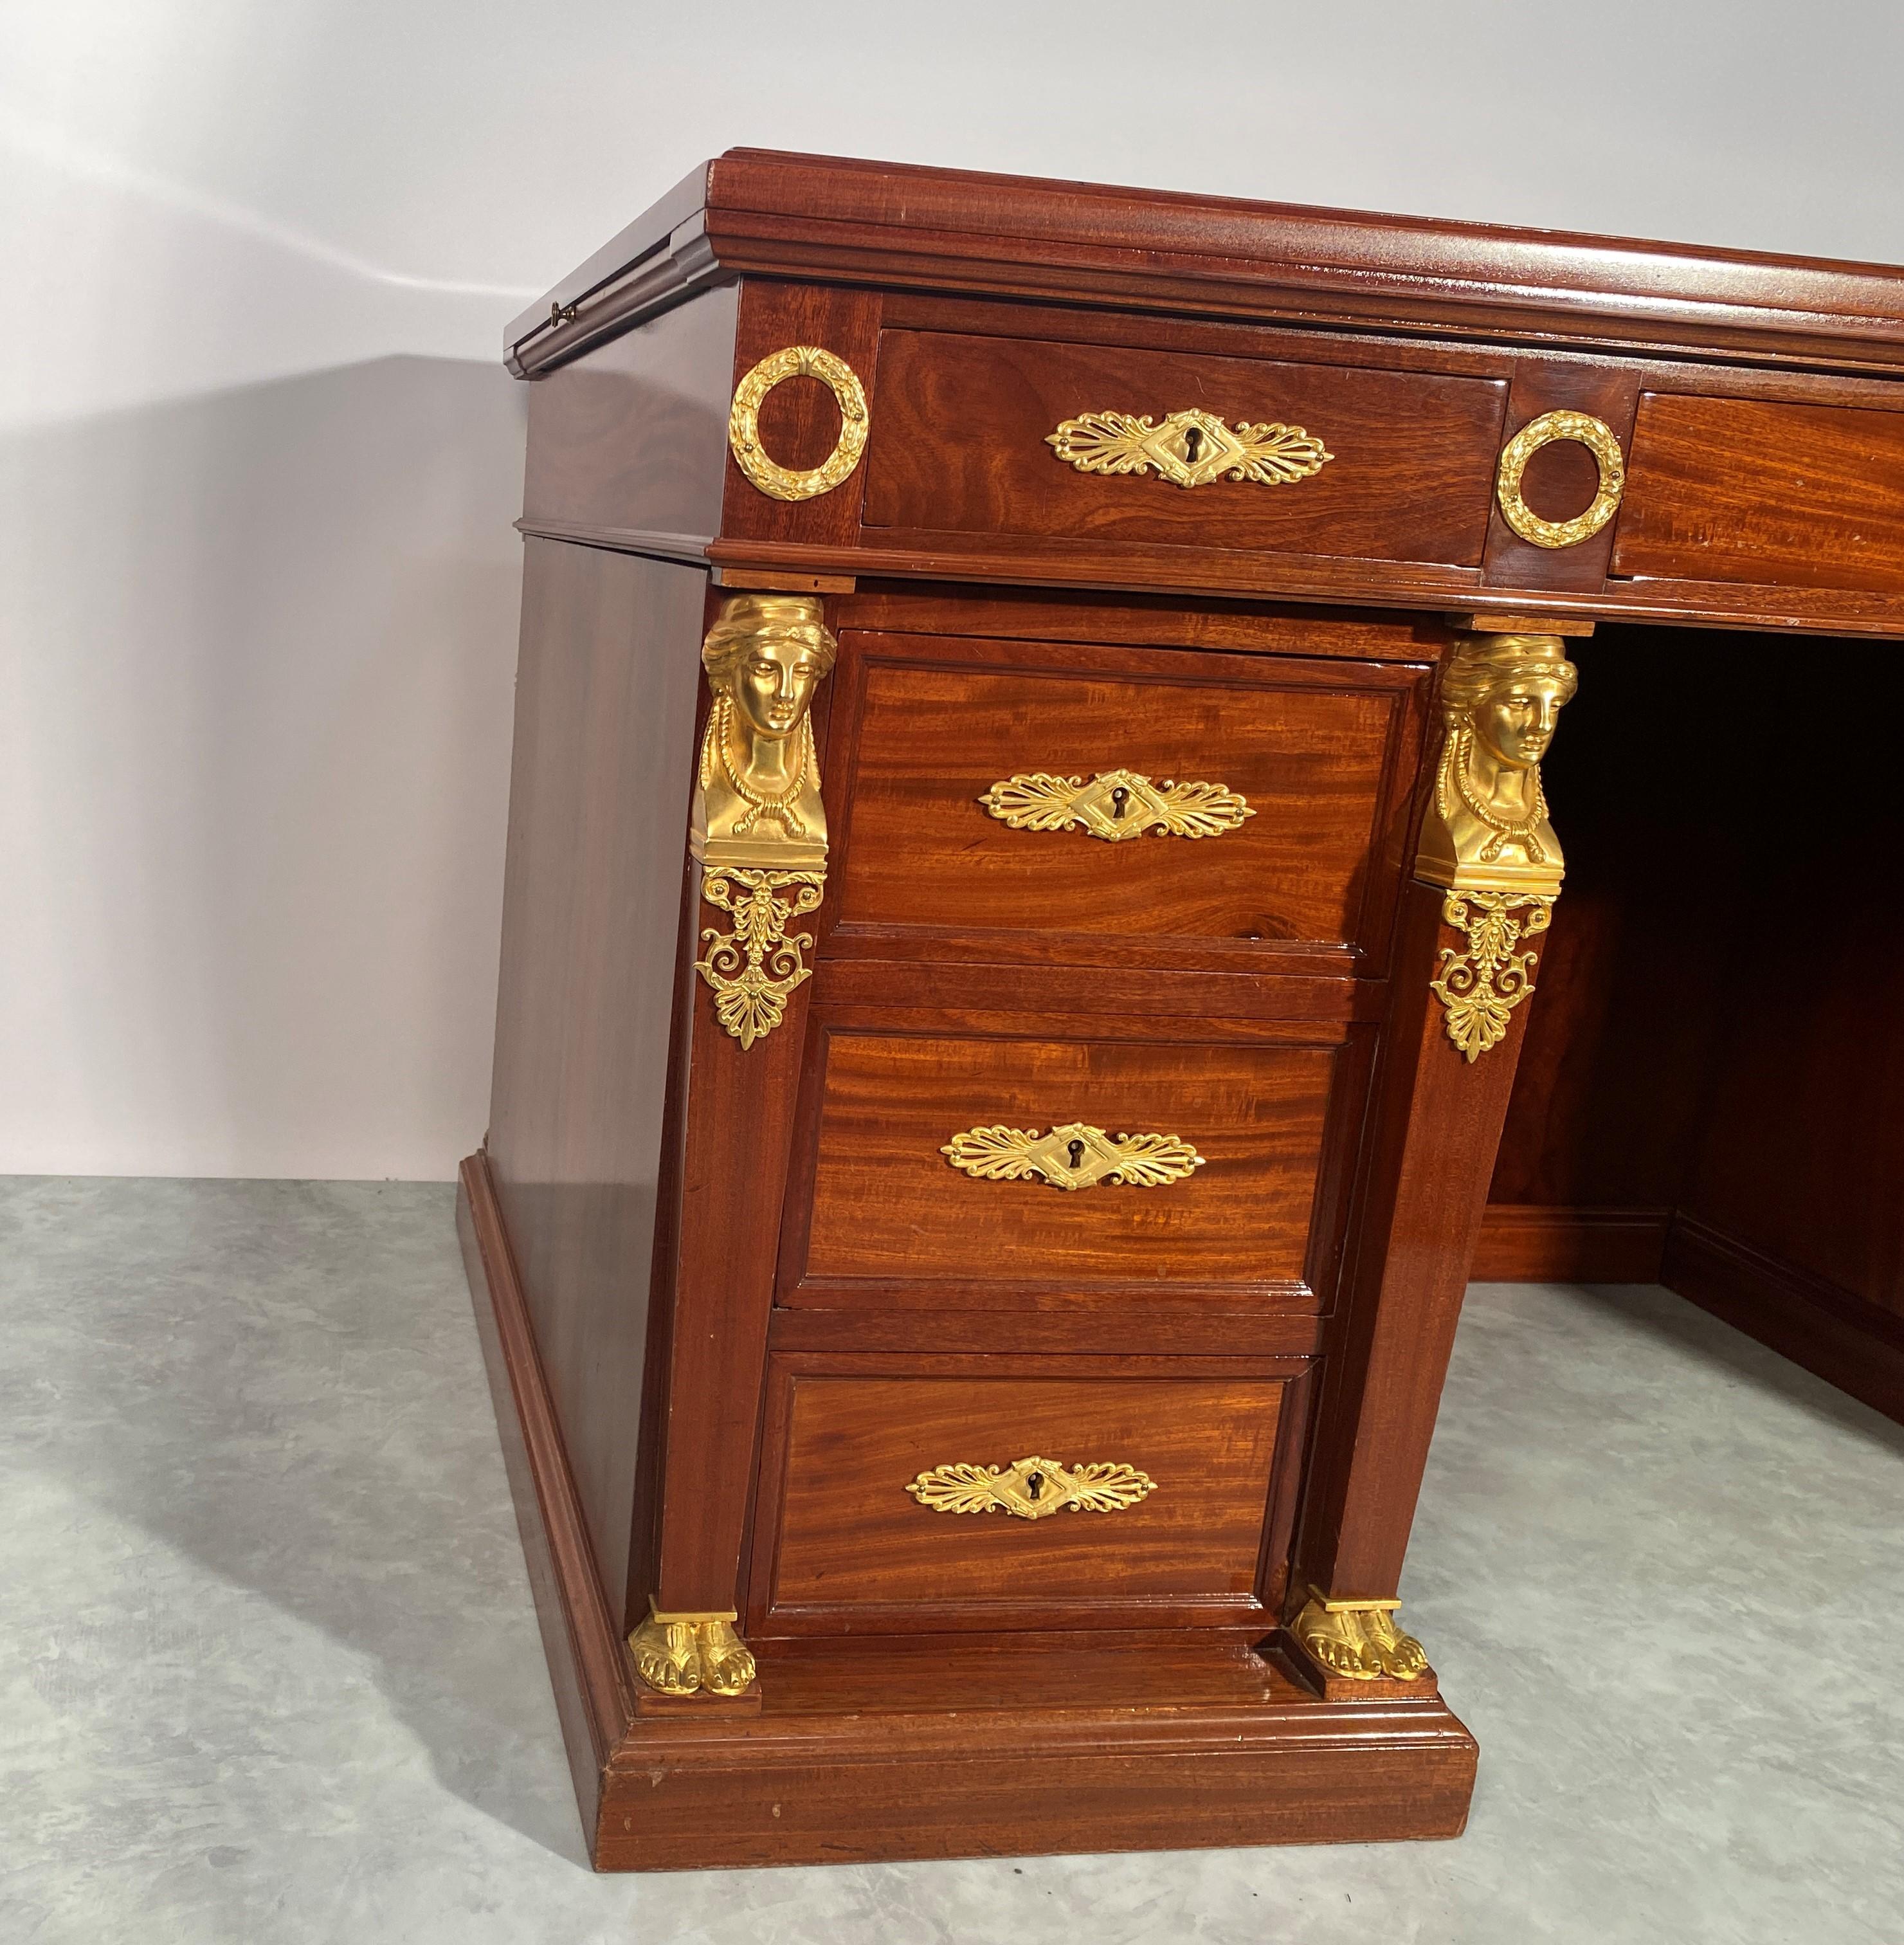 It is composed of two boxes and a central tray opening with nine drawers in total. The desk is in mahogany veneer of very fine grain quality, the color of the mahogany is not dark but rather soft, in harmony with the slightly darker soft veining